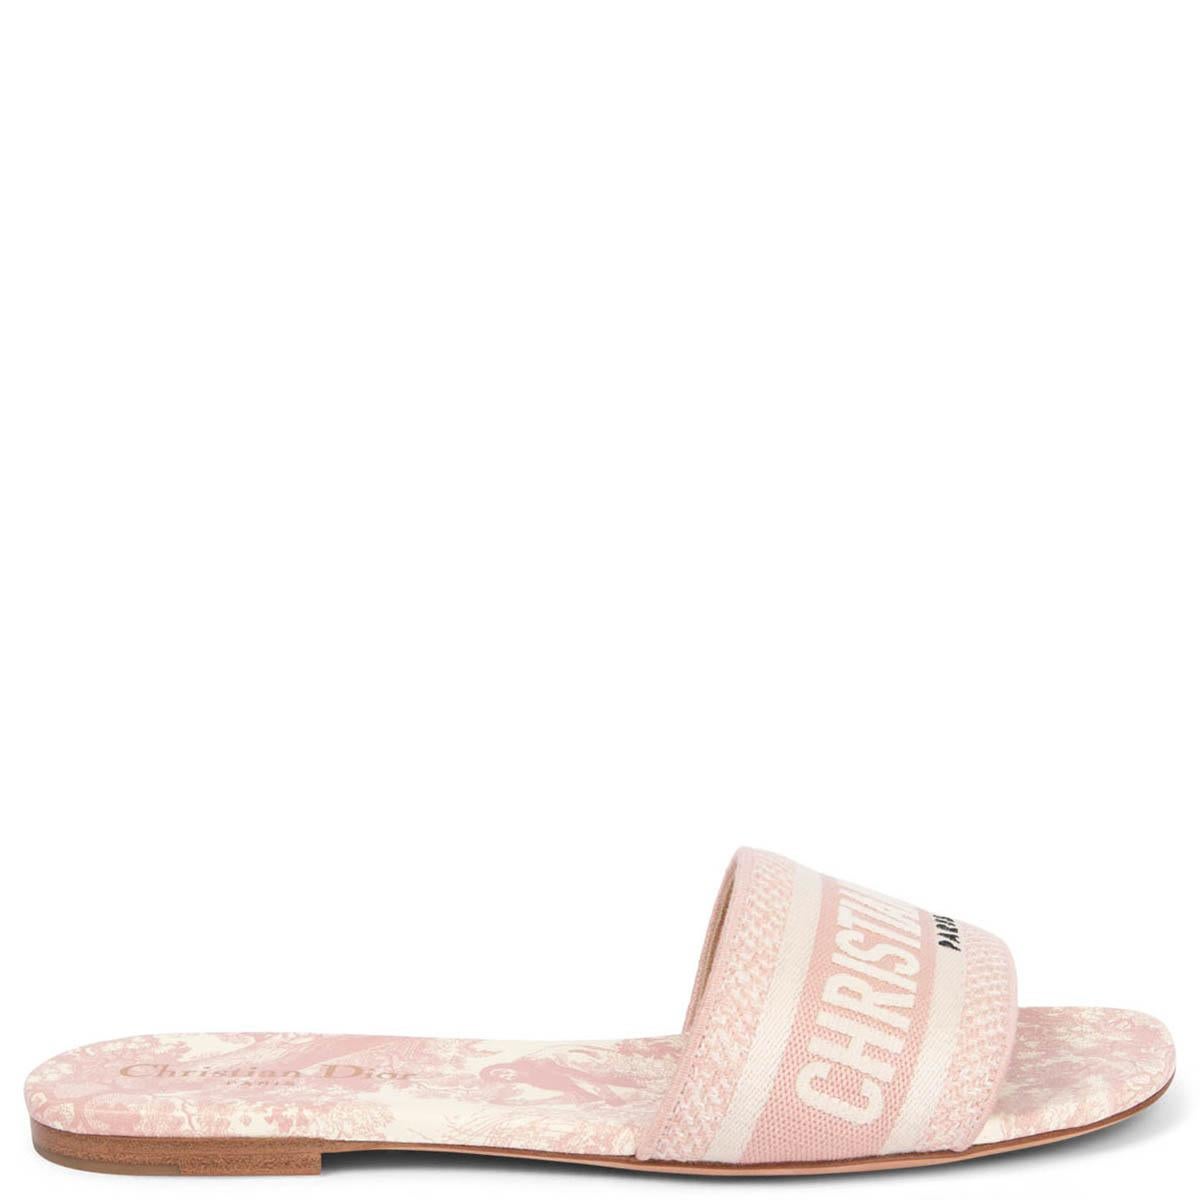 Shop Christian Dior Sandals and Slides for Women | Buyma